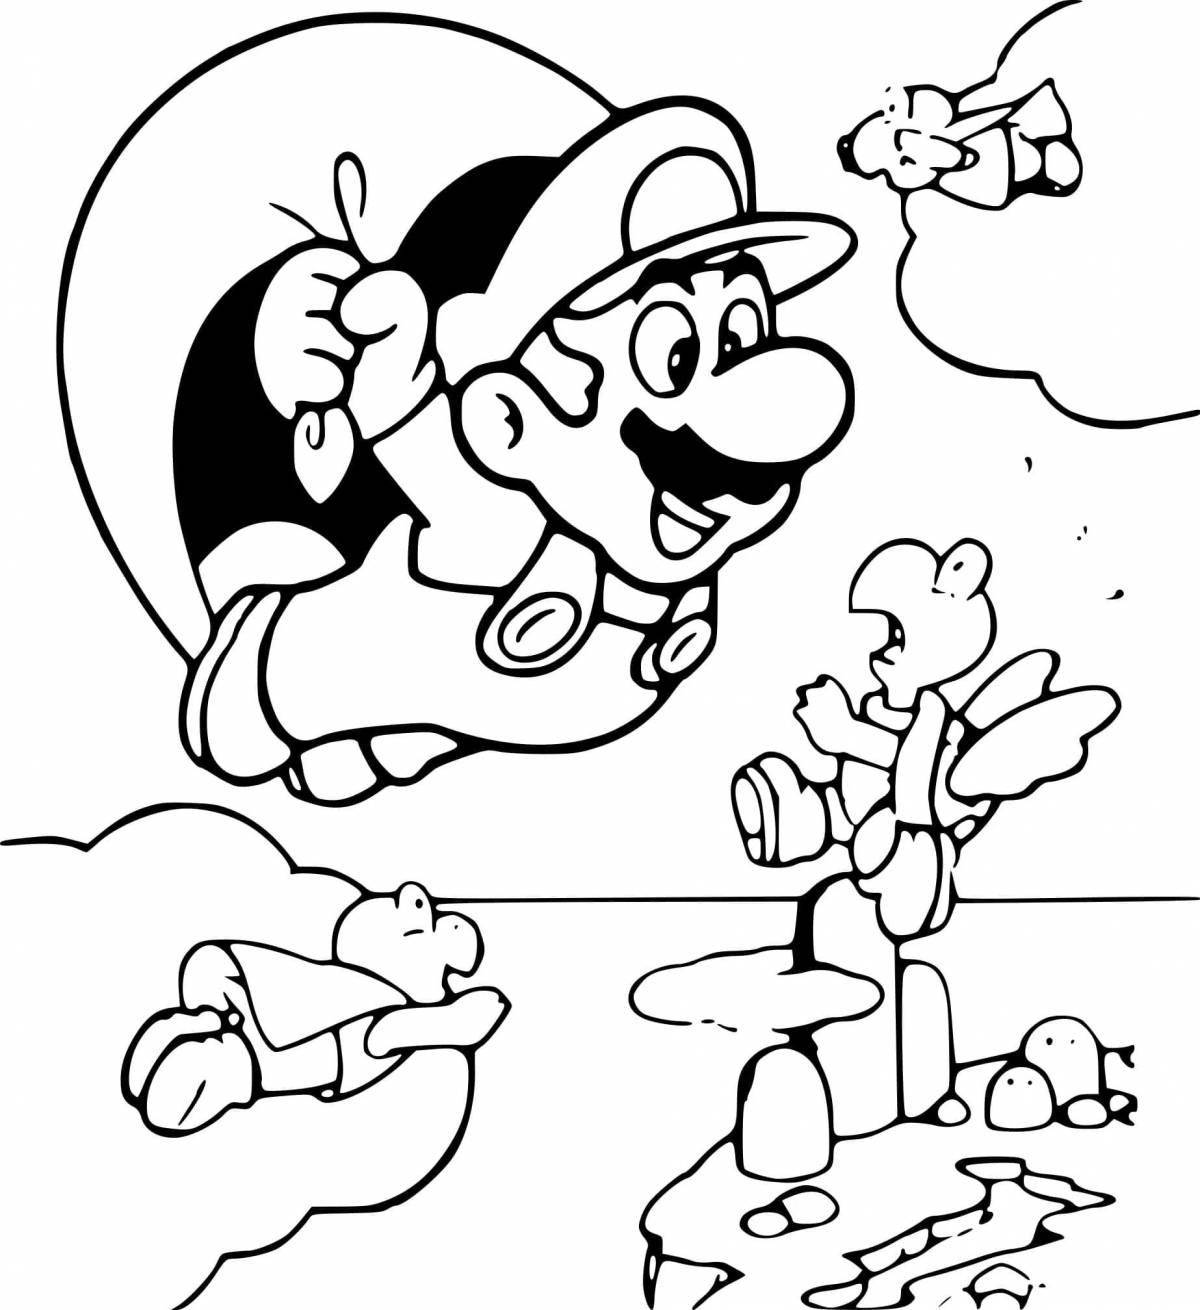 Luigi's holiday coloring page